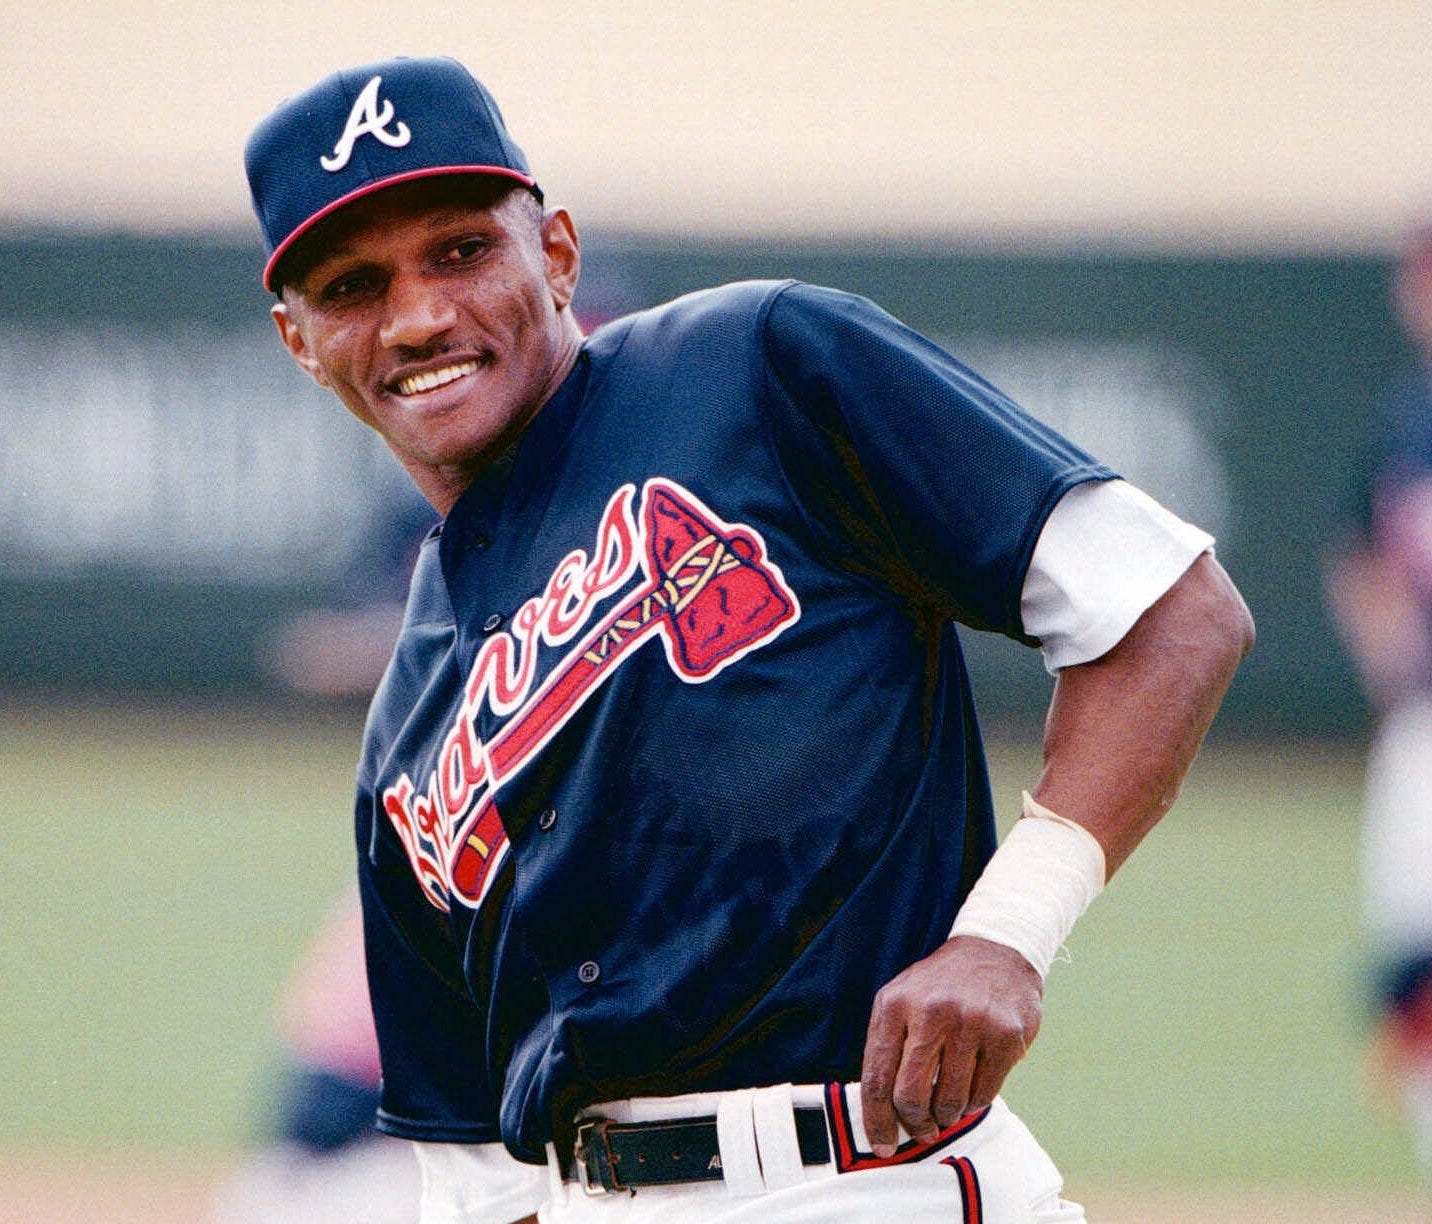 Otis Nixon played 17 years in the major leagues, and finished with a final season with the Braves in 1999.